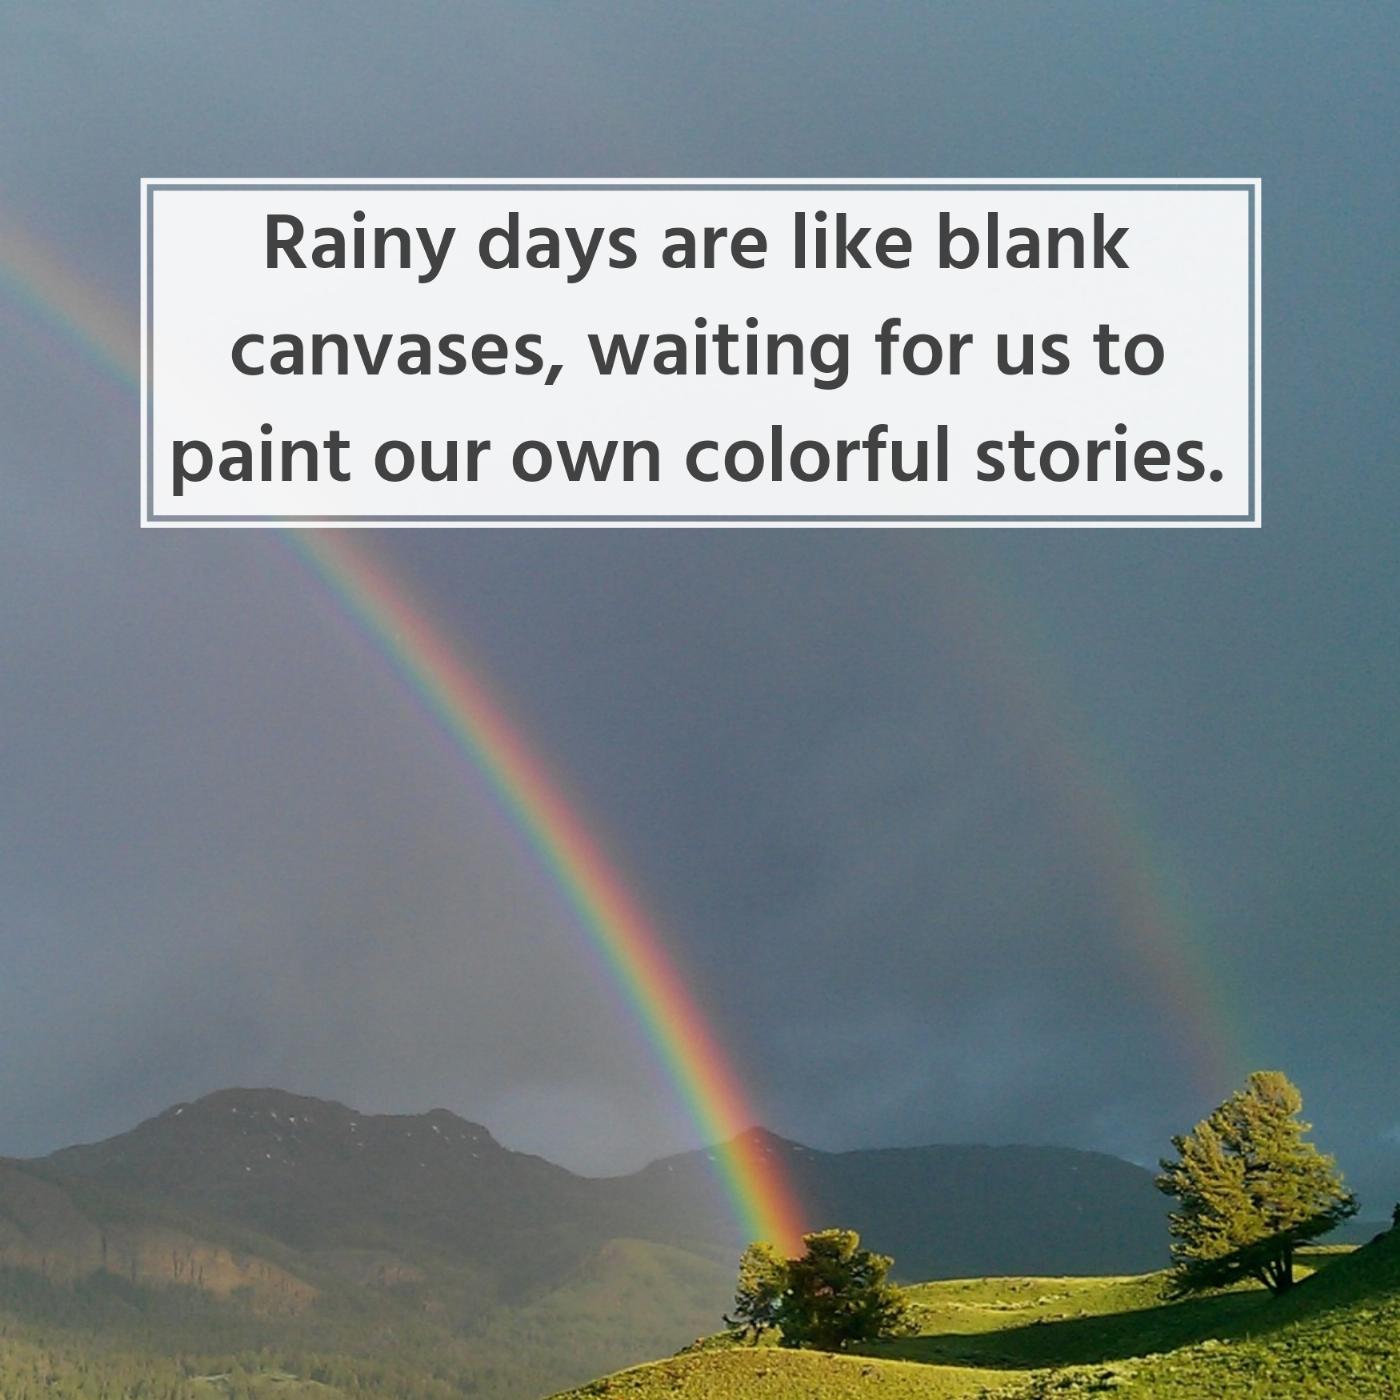 Rainy days are like blank canvases waiting for us to paint